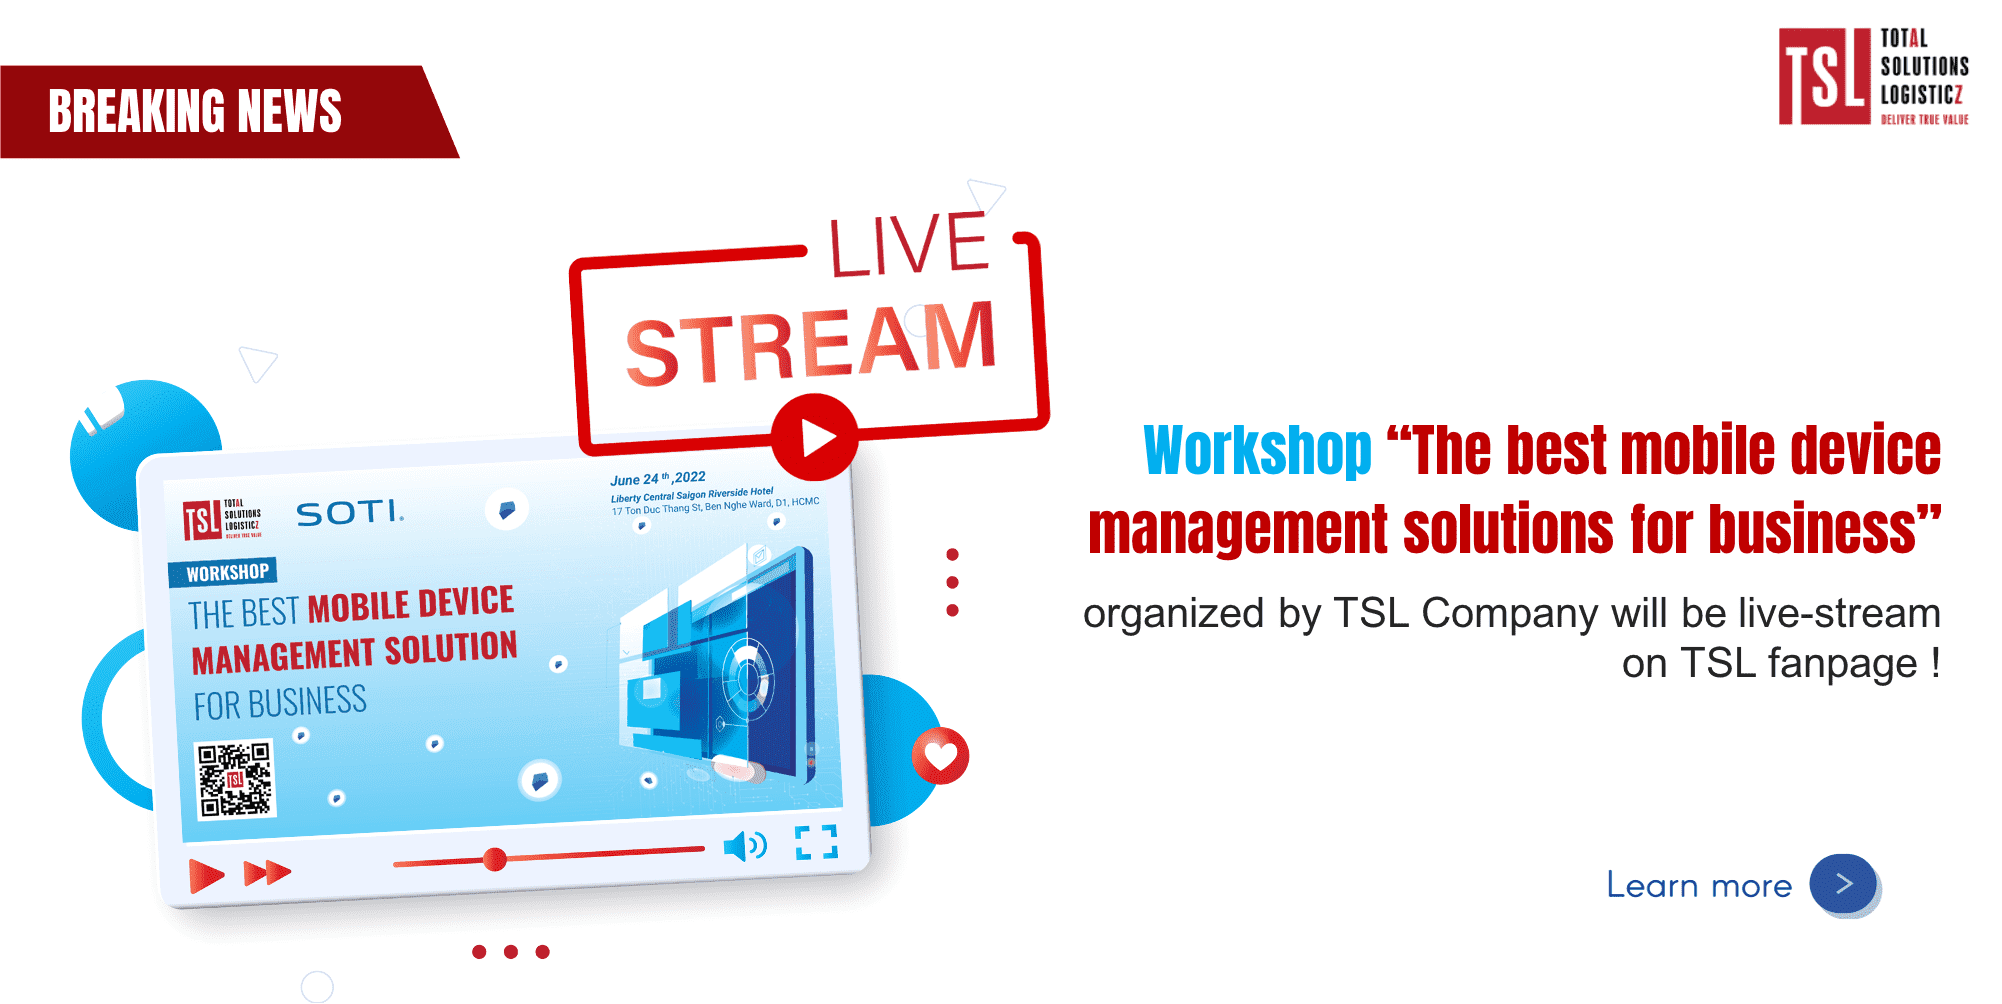 Workshop “The best mobile device management solutions for business” organized by TSL Company will be live-stream on TSL fanpage !